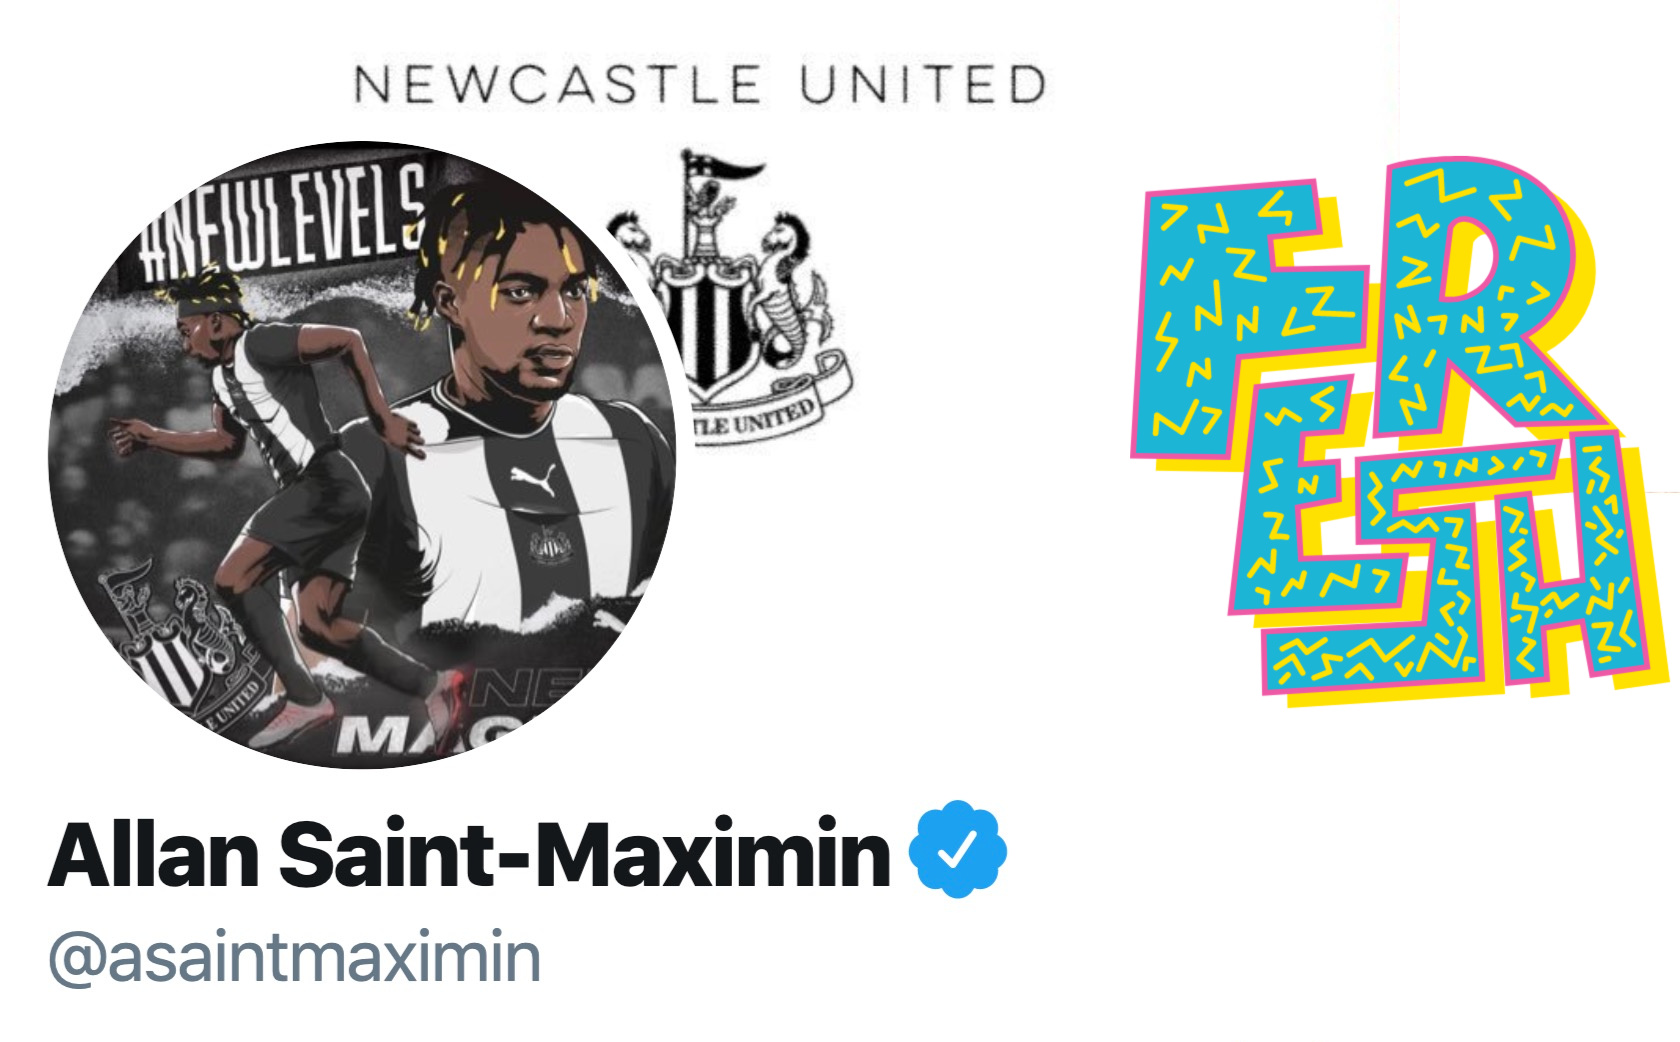 Newcastle star Allan Saint-Maximin has Jamie from Twitter on ropes after “PL is boring” jibe